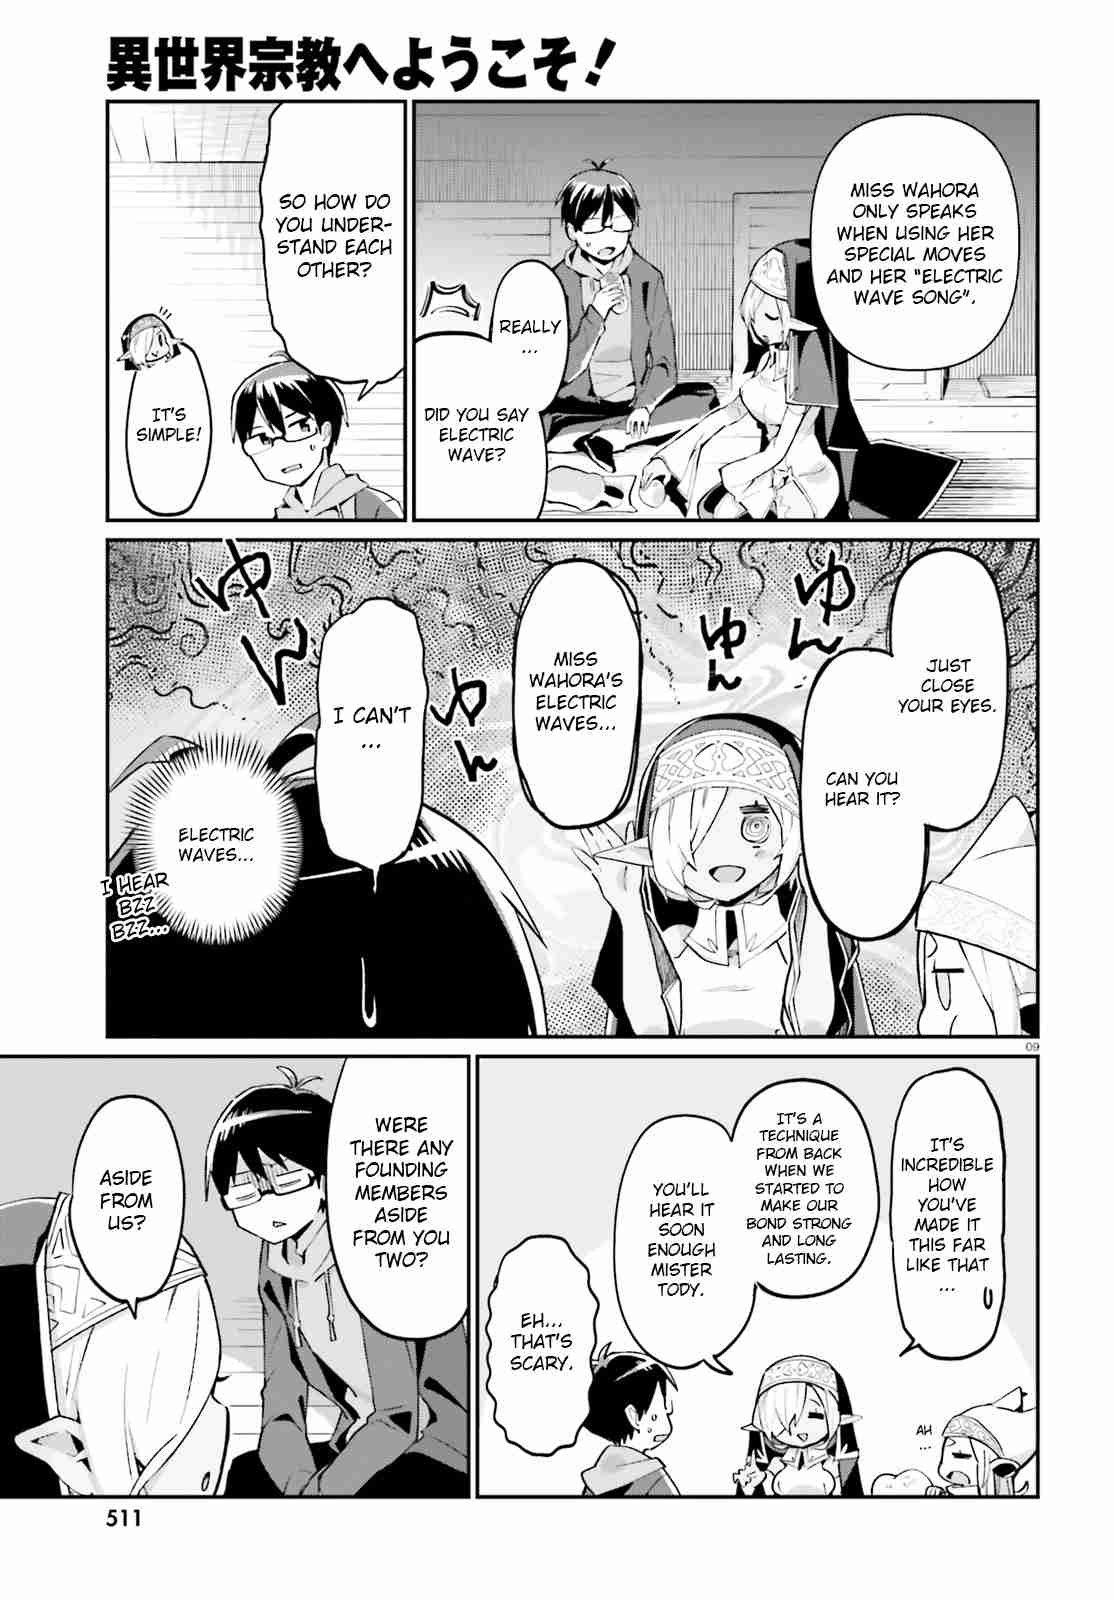 Welcome to religion in another world Vol. 1 Ch. 4 Welcome to miss Wahora's attendant